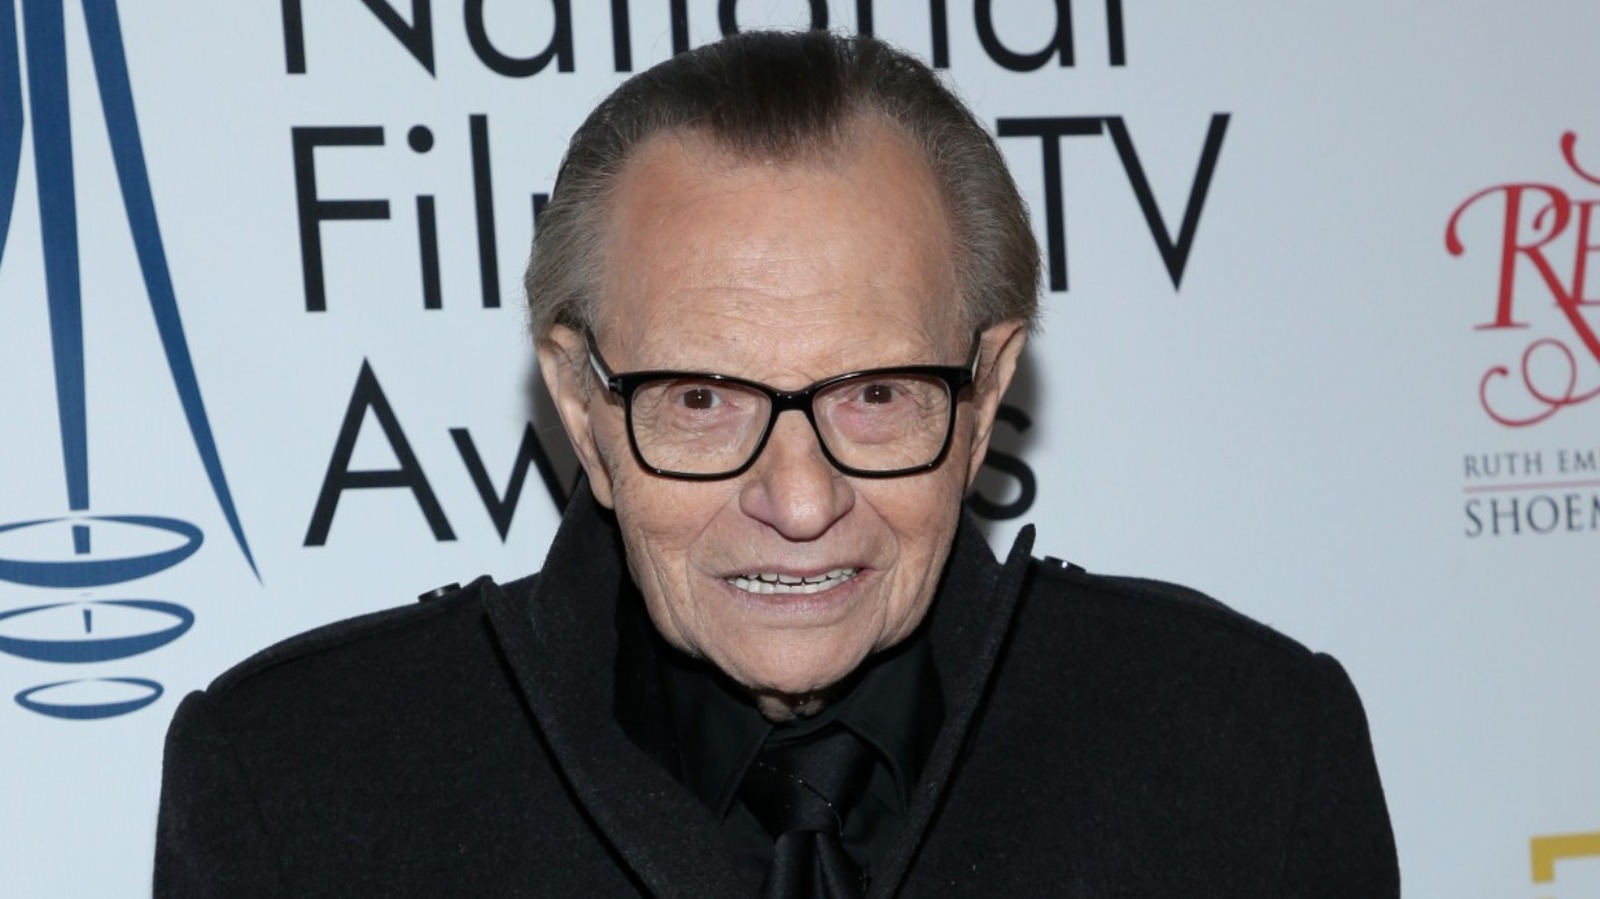 How Much Money Does The Famous Newscaster Have? Larry King's Net Worth